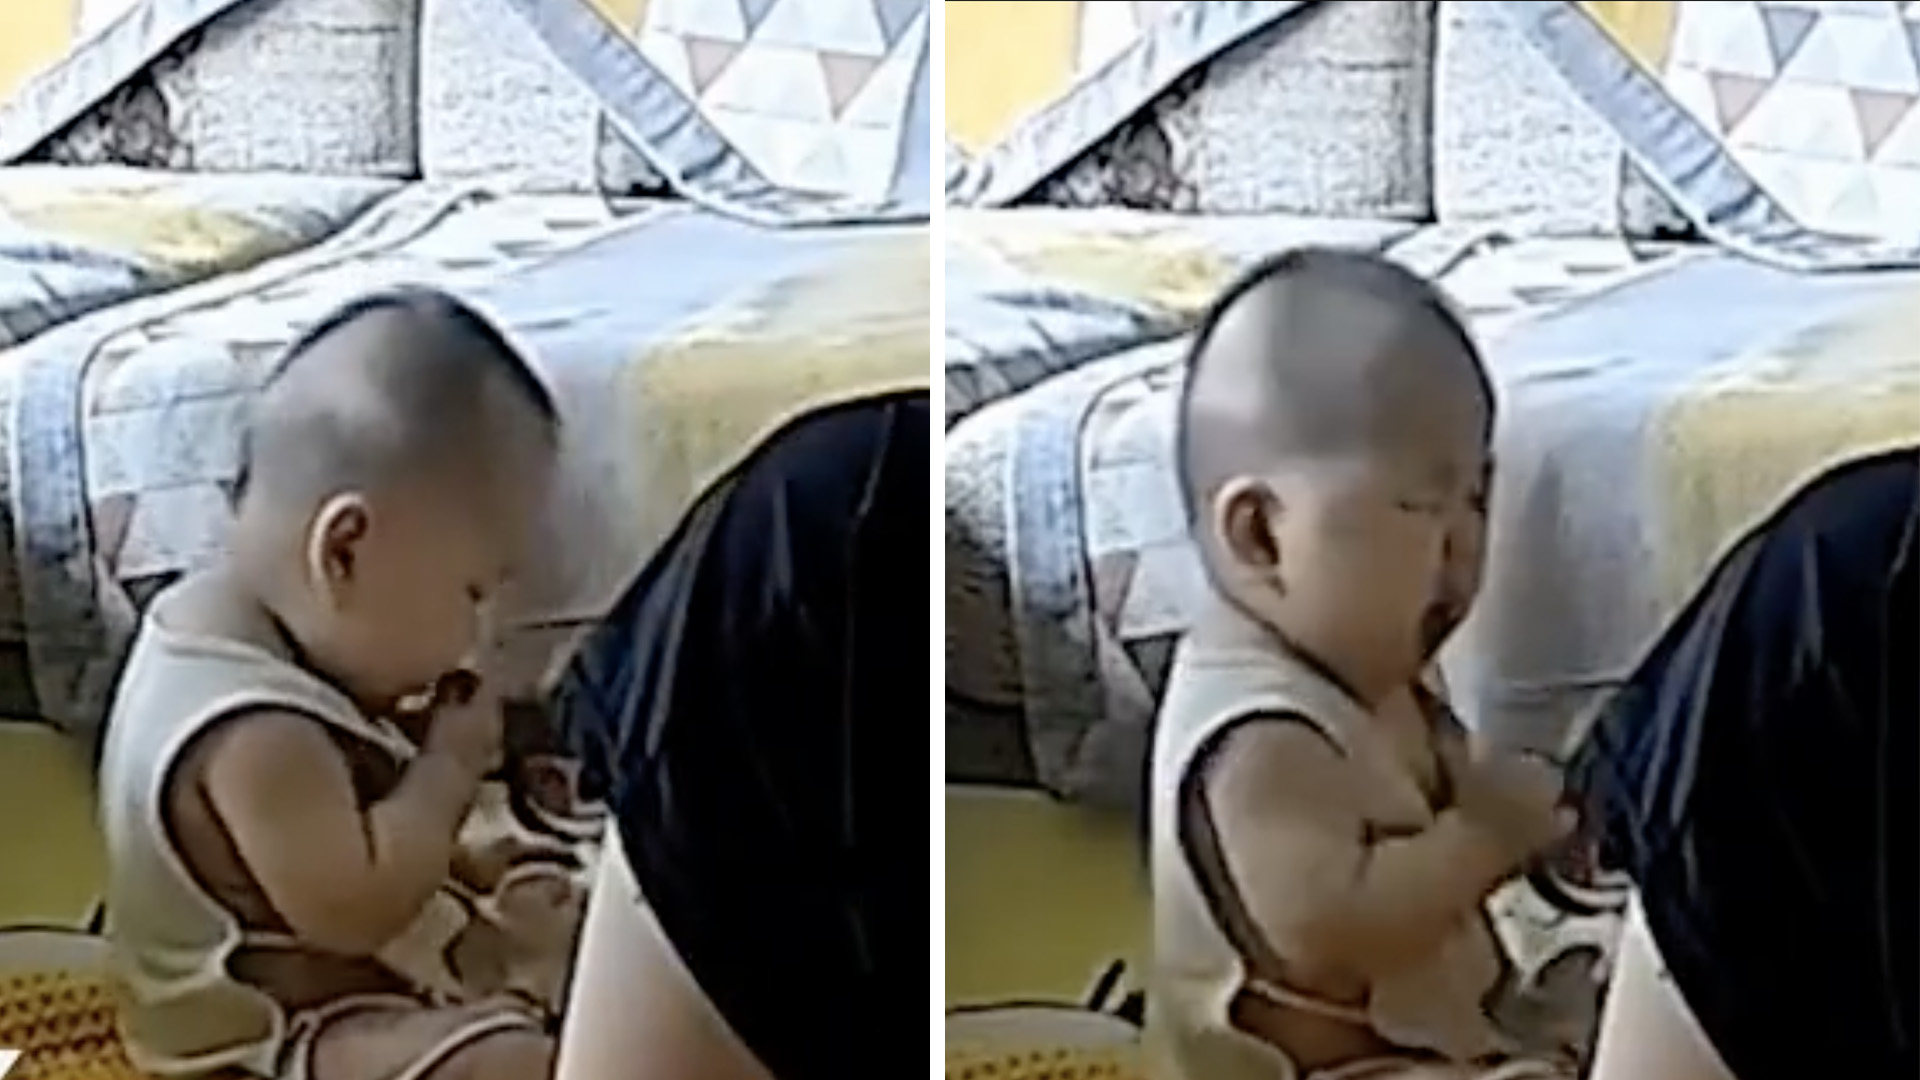 A video of a baby eating its own excrement is watched more than 200 million times in China, triggering debate over parenting. Photo: Handout